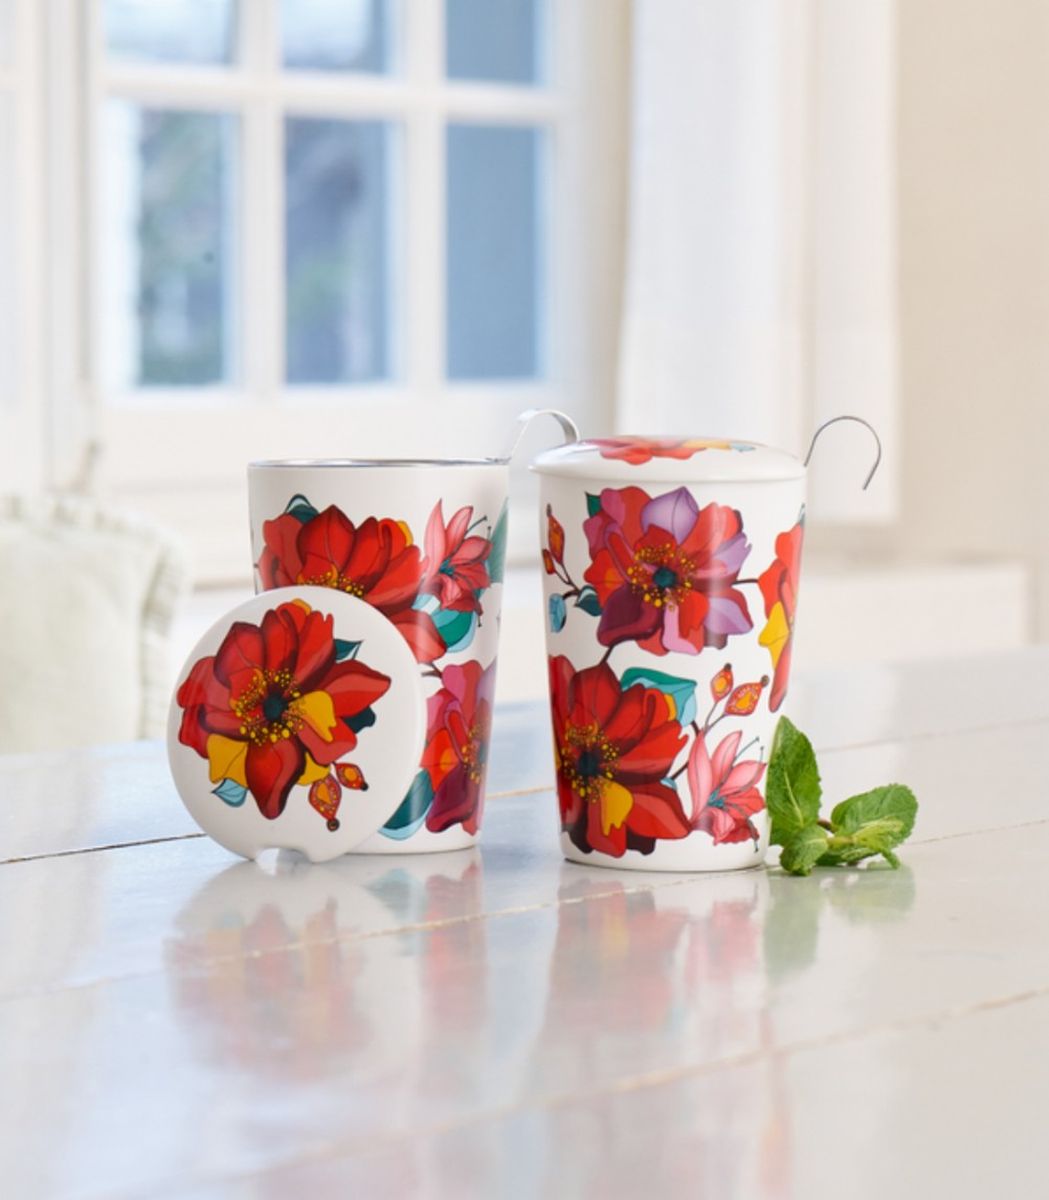 Double-walled porcelain mug with infuser - Poppy